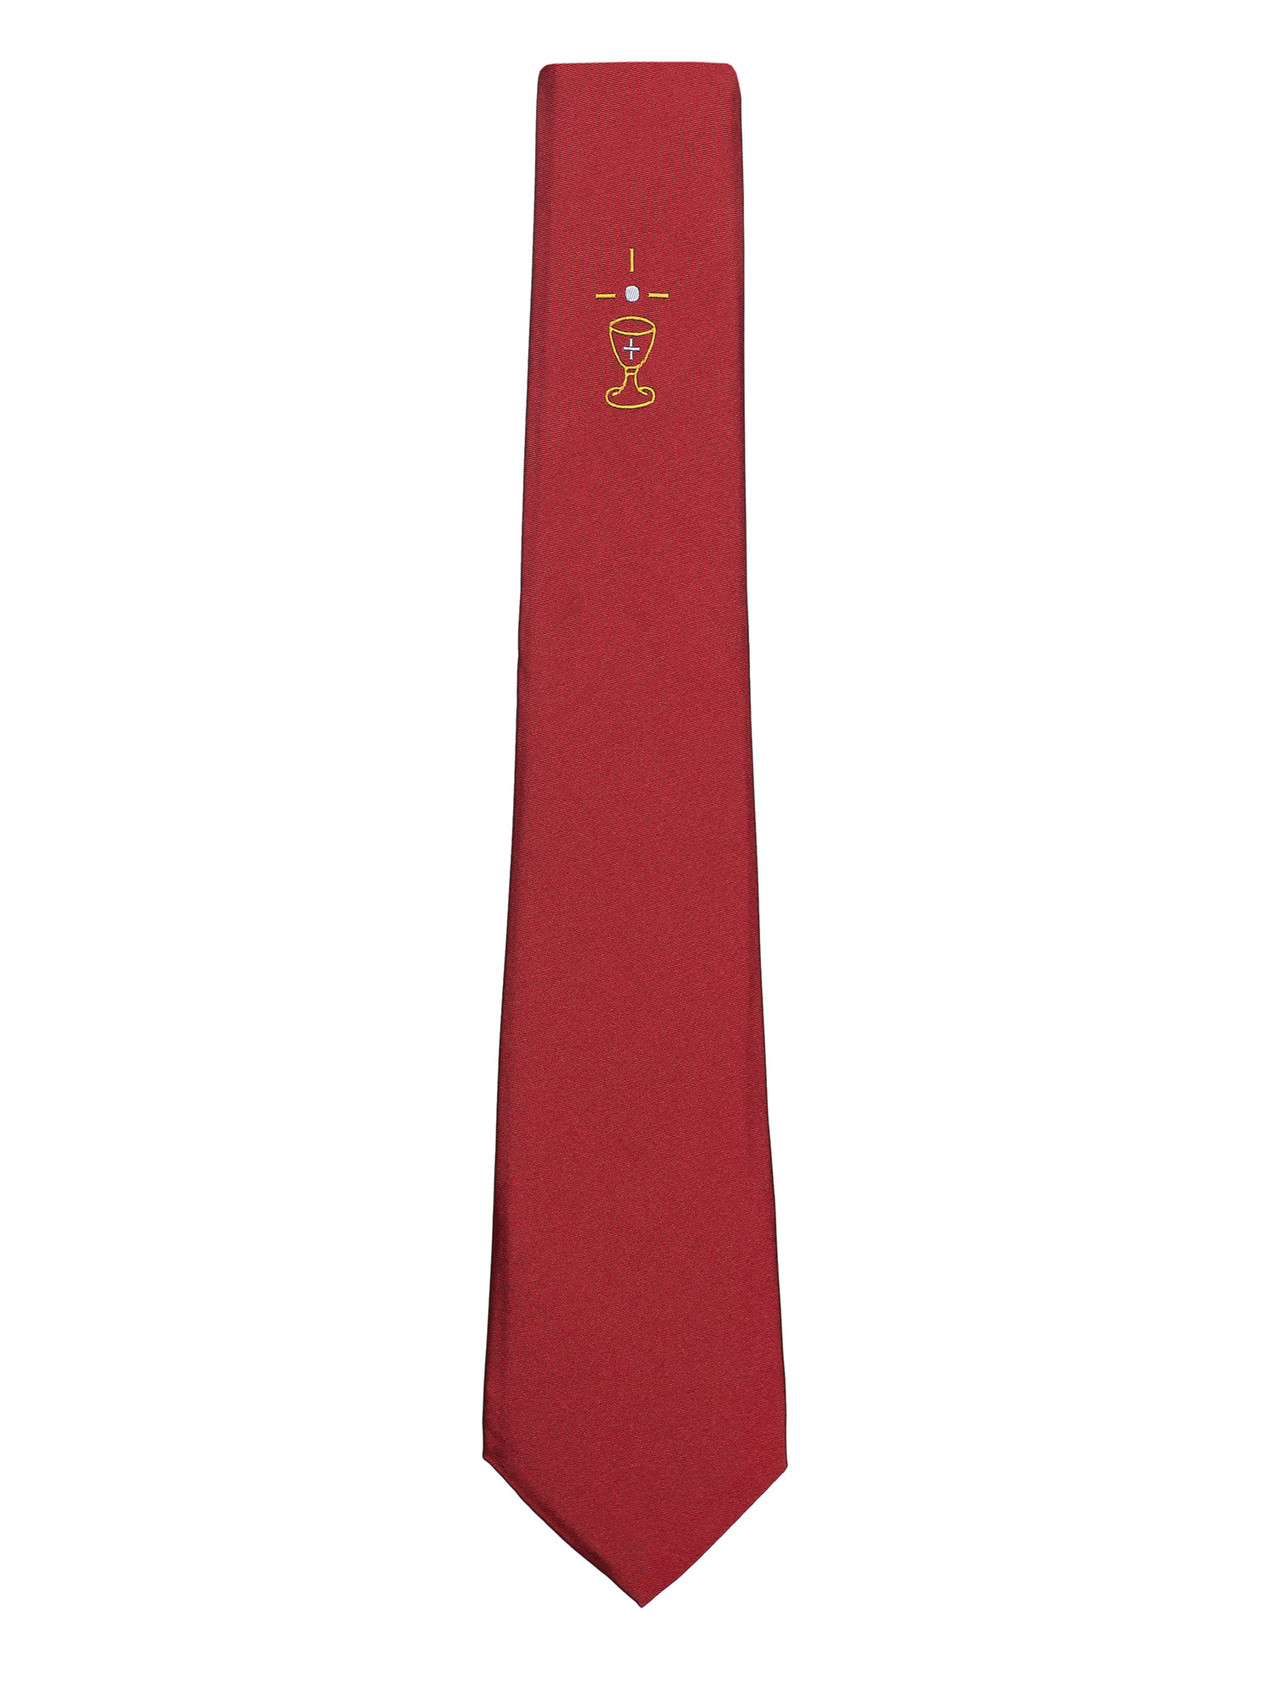 Blue communion tie | boys communion tie | communion tie | first holy ...